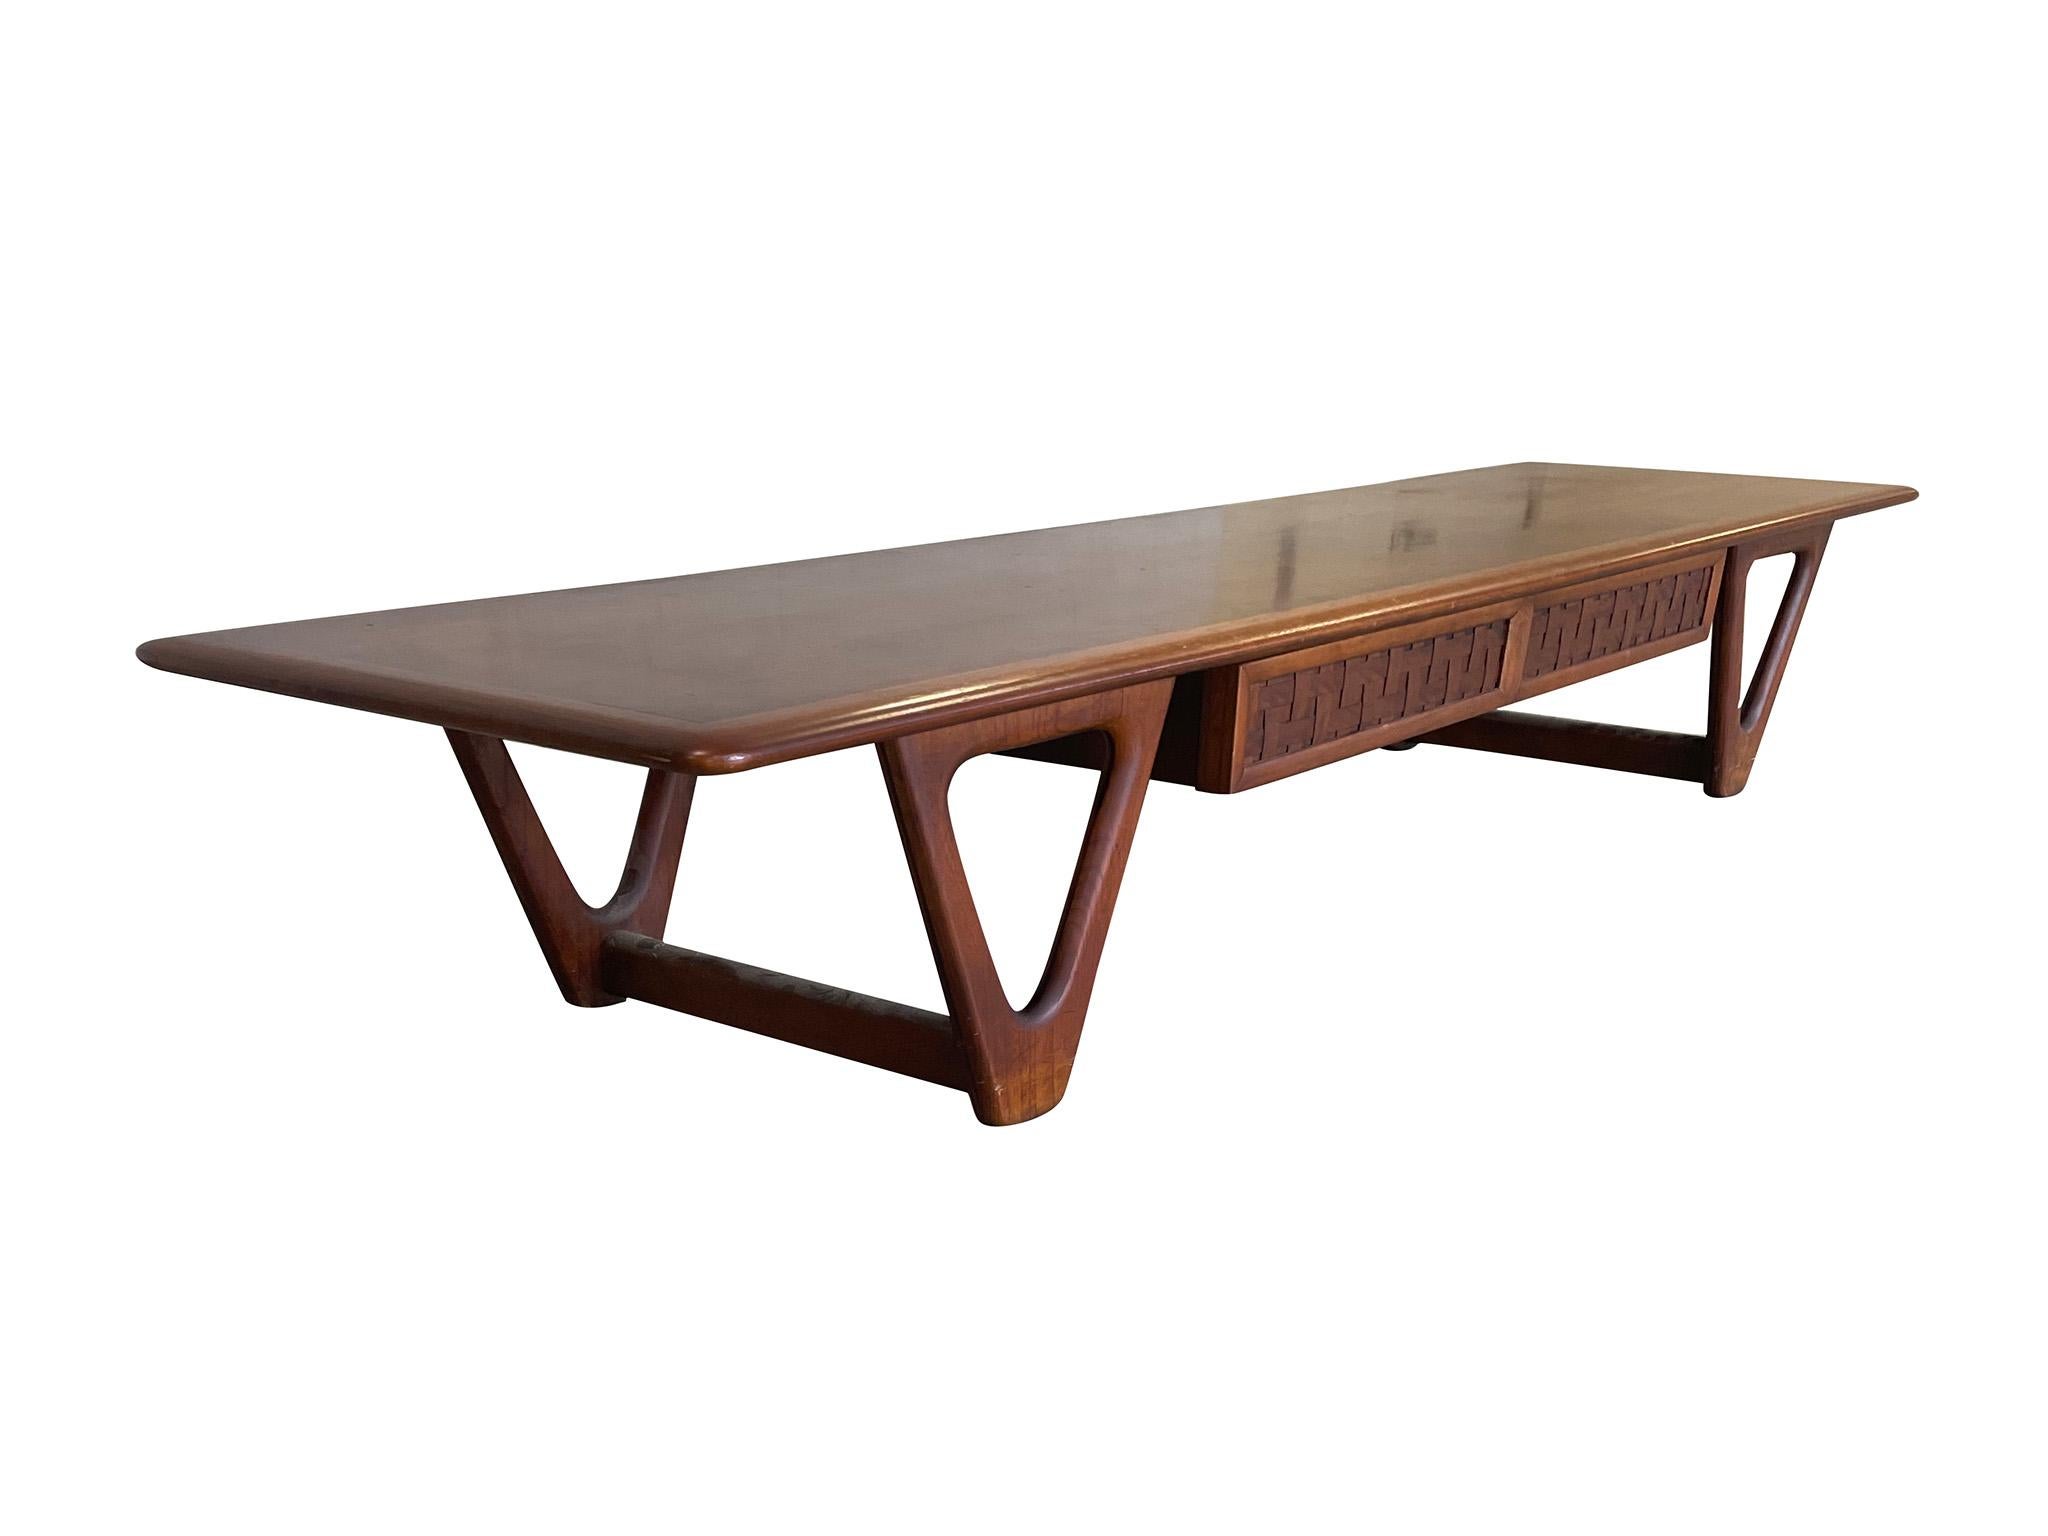 Handsome 1960s Perception coffee table, designed by Warren Church for Virginia-based Lane Company. Crafted in rich oak and walnut, the coffee table is designed with one large functional drawer with basketweave front and sculptural v-shaped legs. A